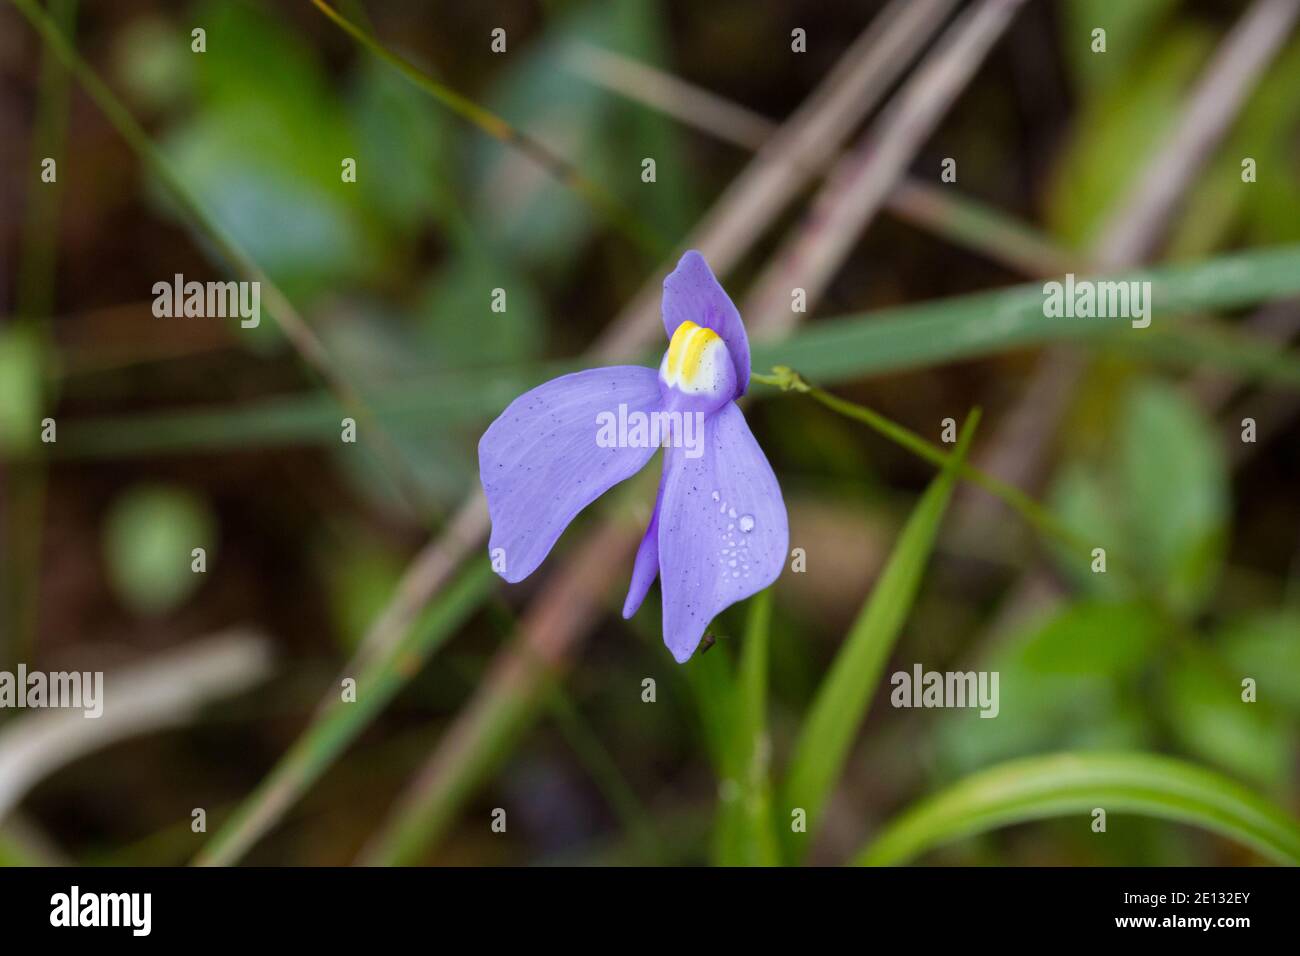 the beautiful violet flower of the Bladderwort Utricularia geminiloba in the mountains between Teresopolis and Petropolis in Brazil Stock Photo